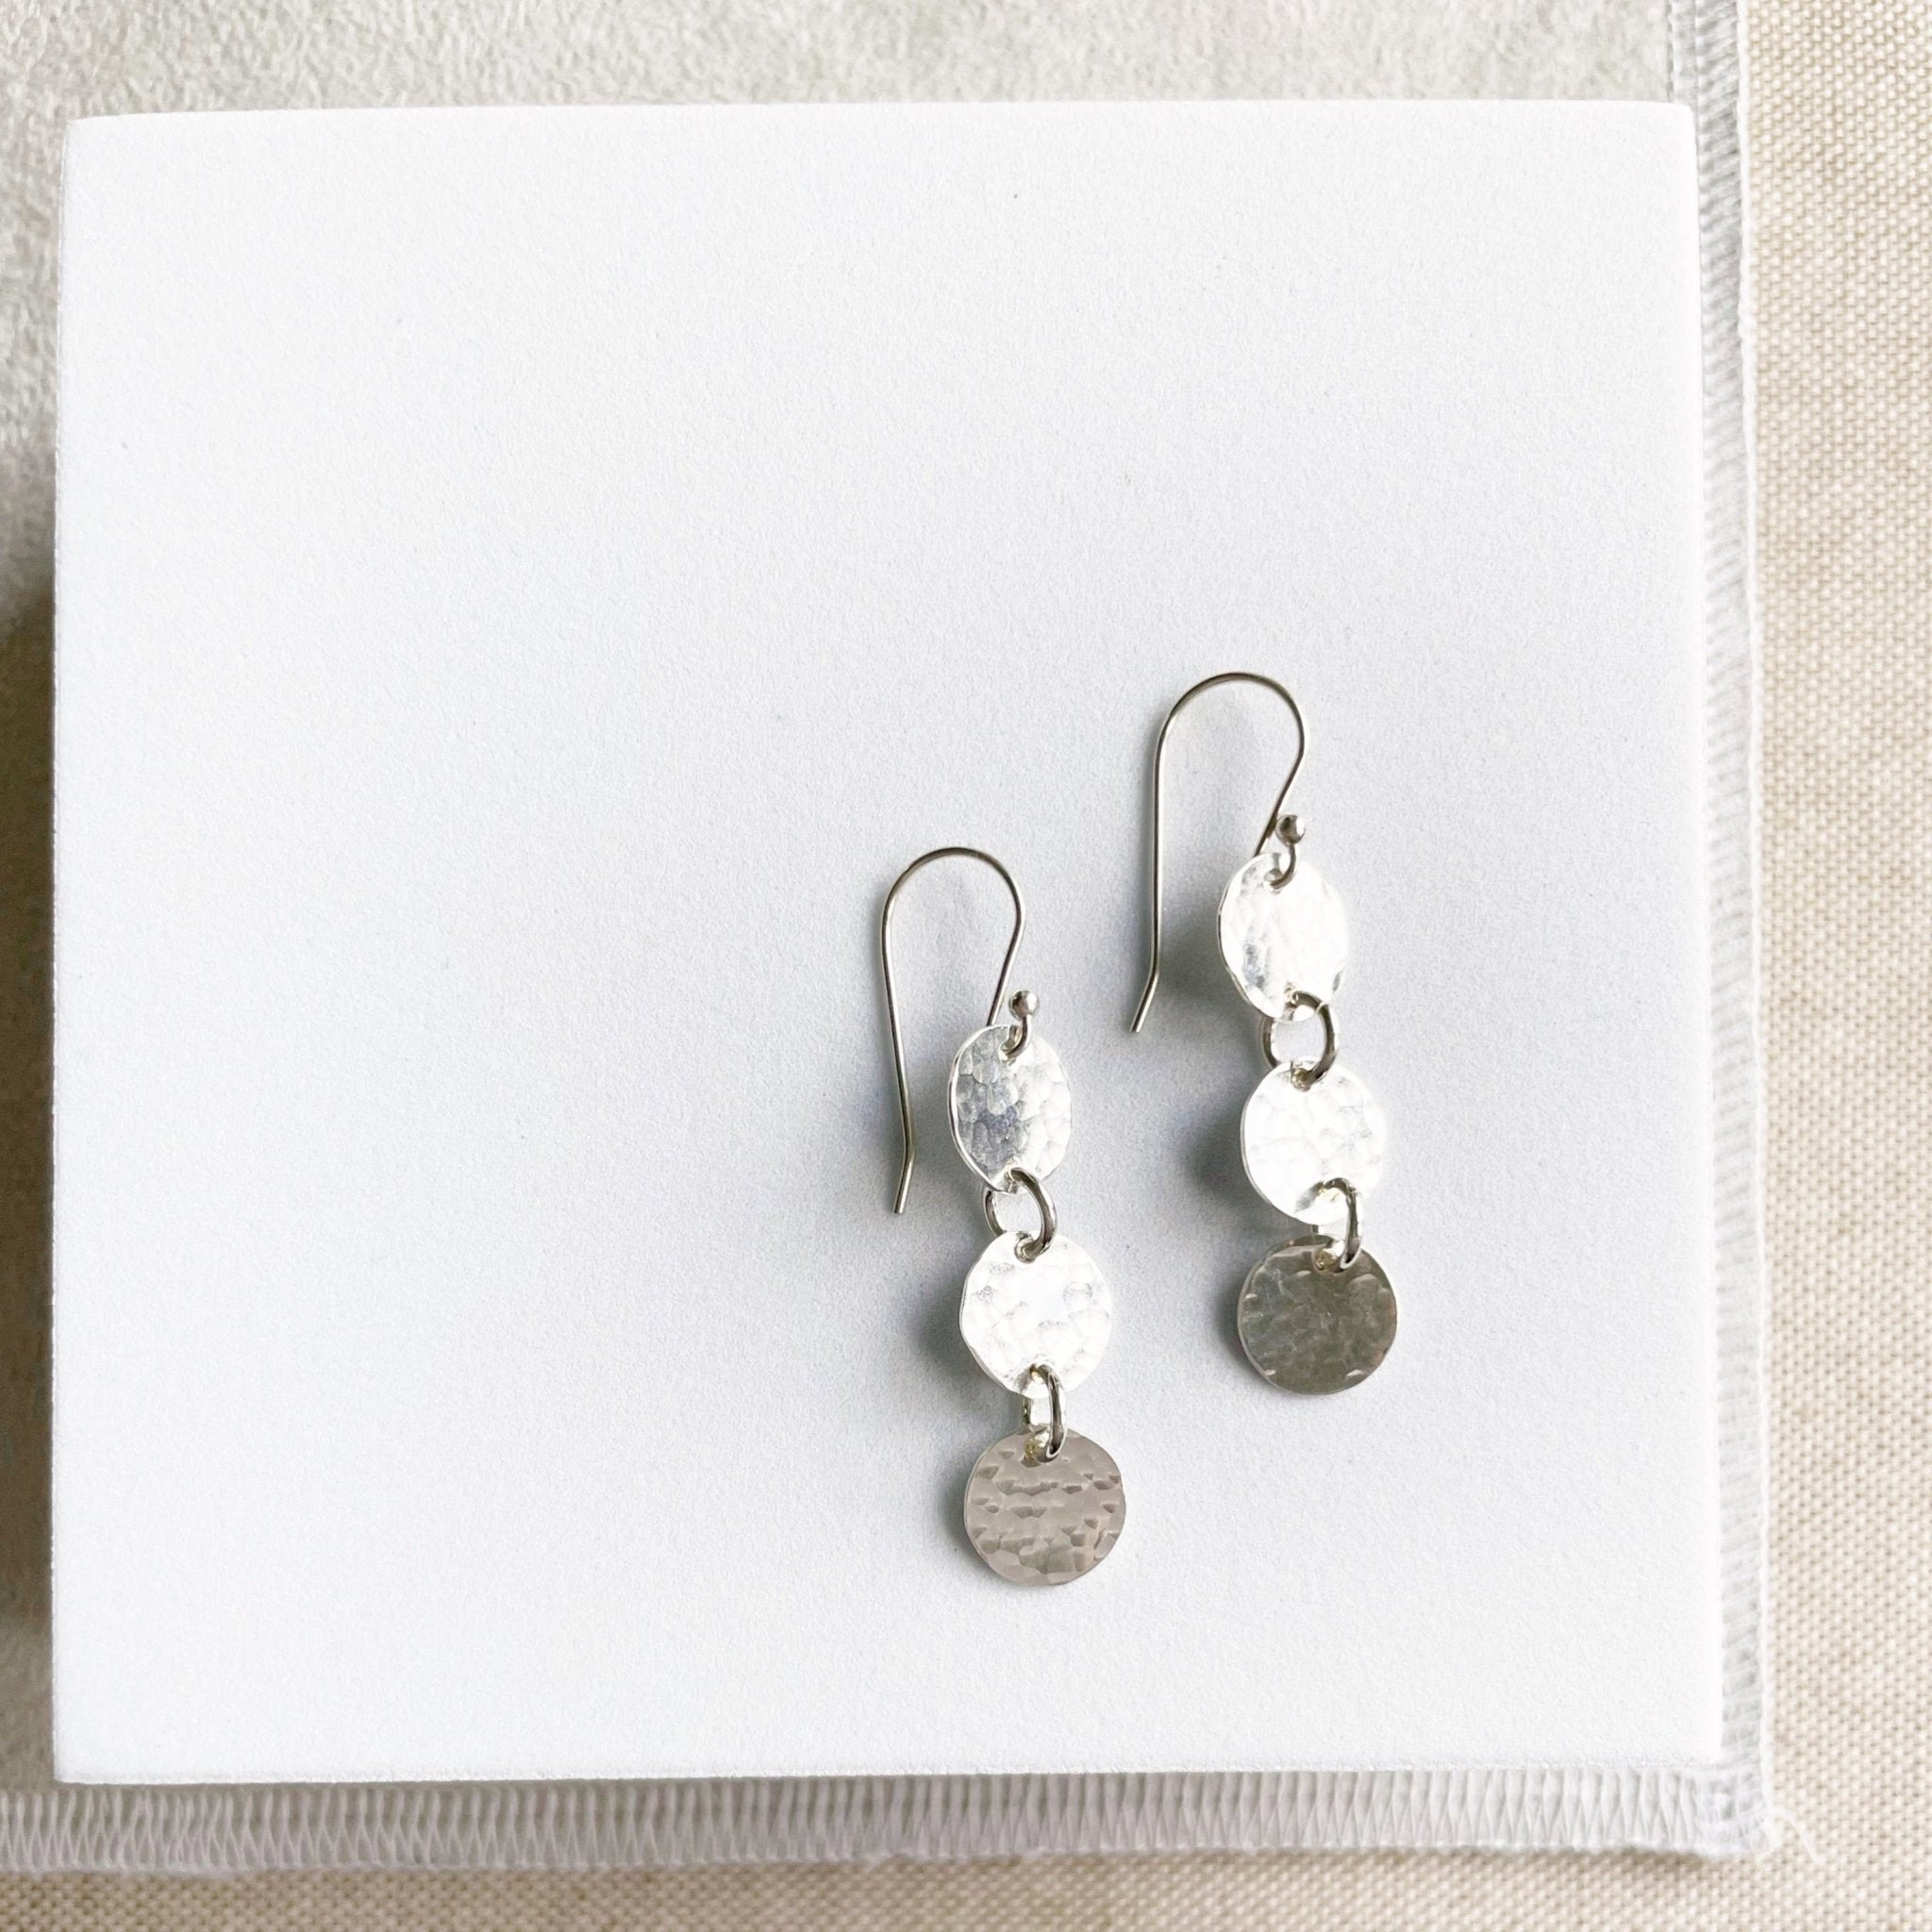 Silver 1.5 inch drop earrings with 3 same sized textured discs. Cole Earrings by Sarah Cornwell Jewelry